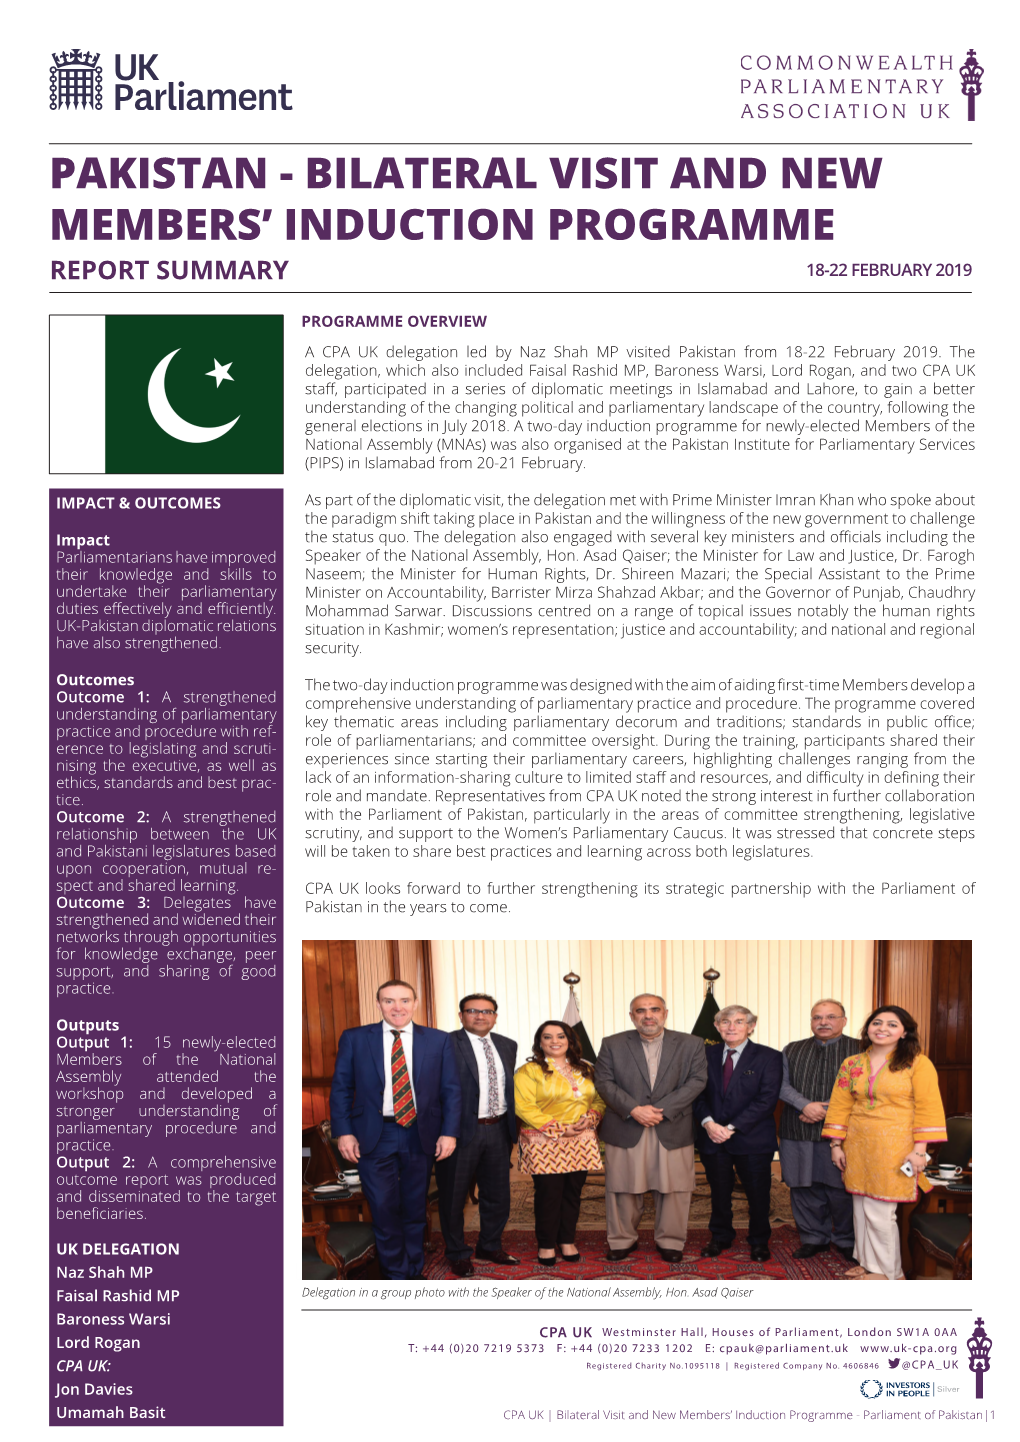 Pakistan - Bilateral Visit and New Members’ Induction Programme Report Summary 18-22 February 2019